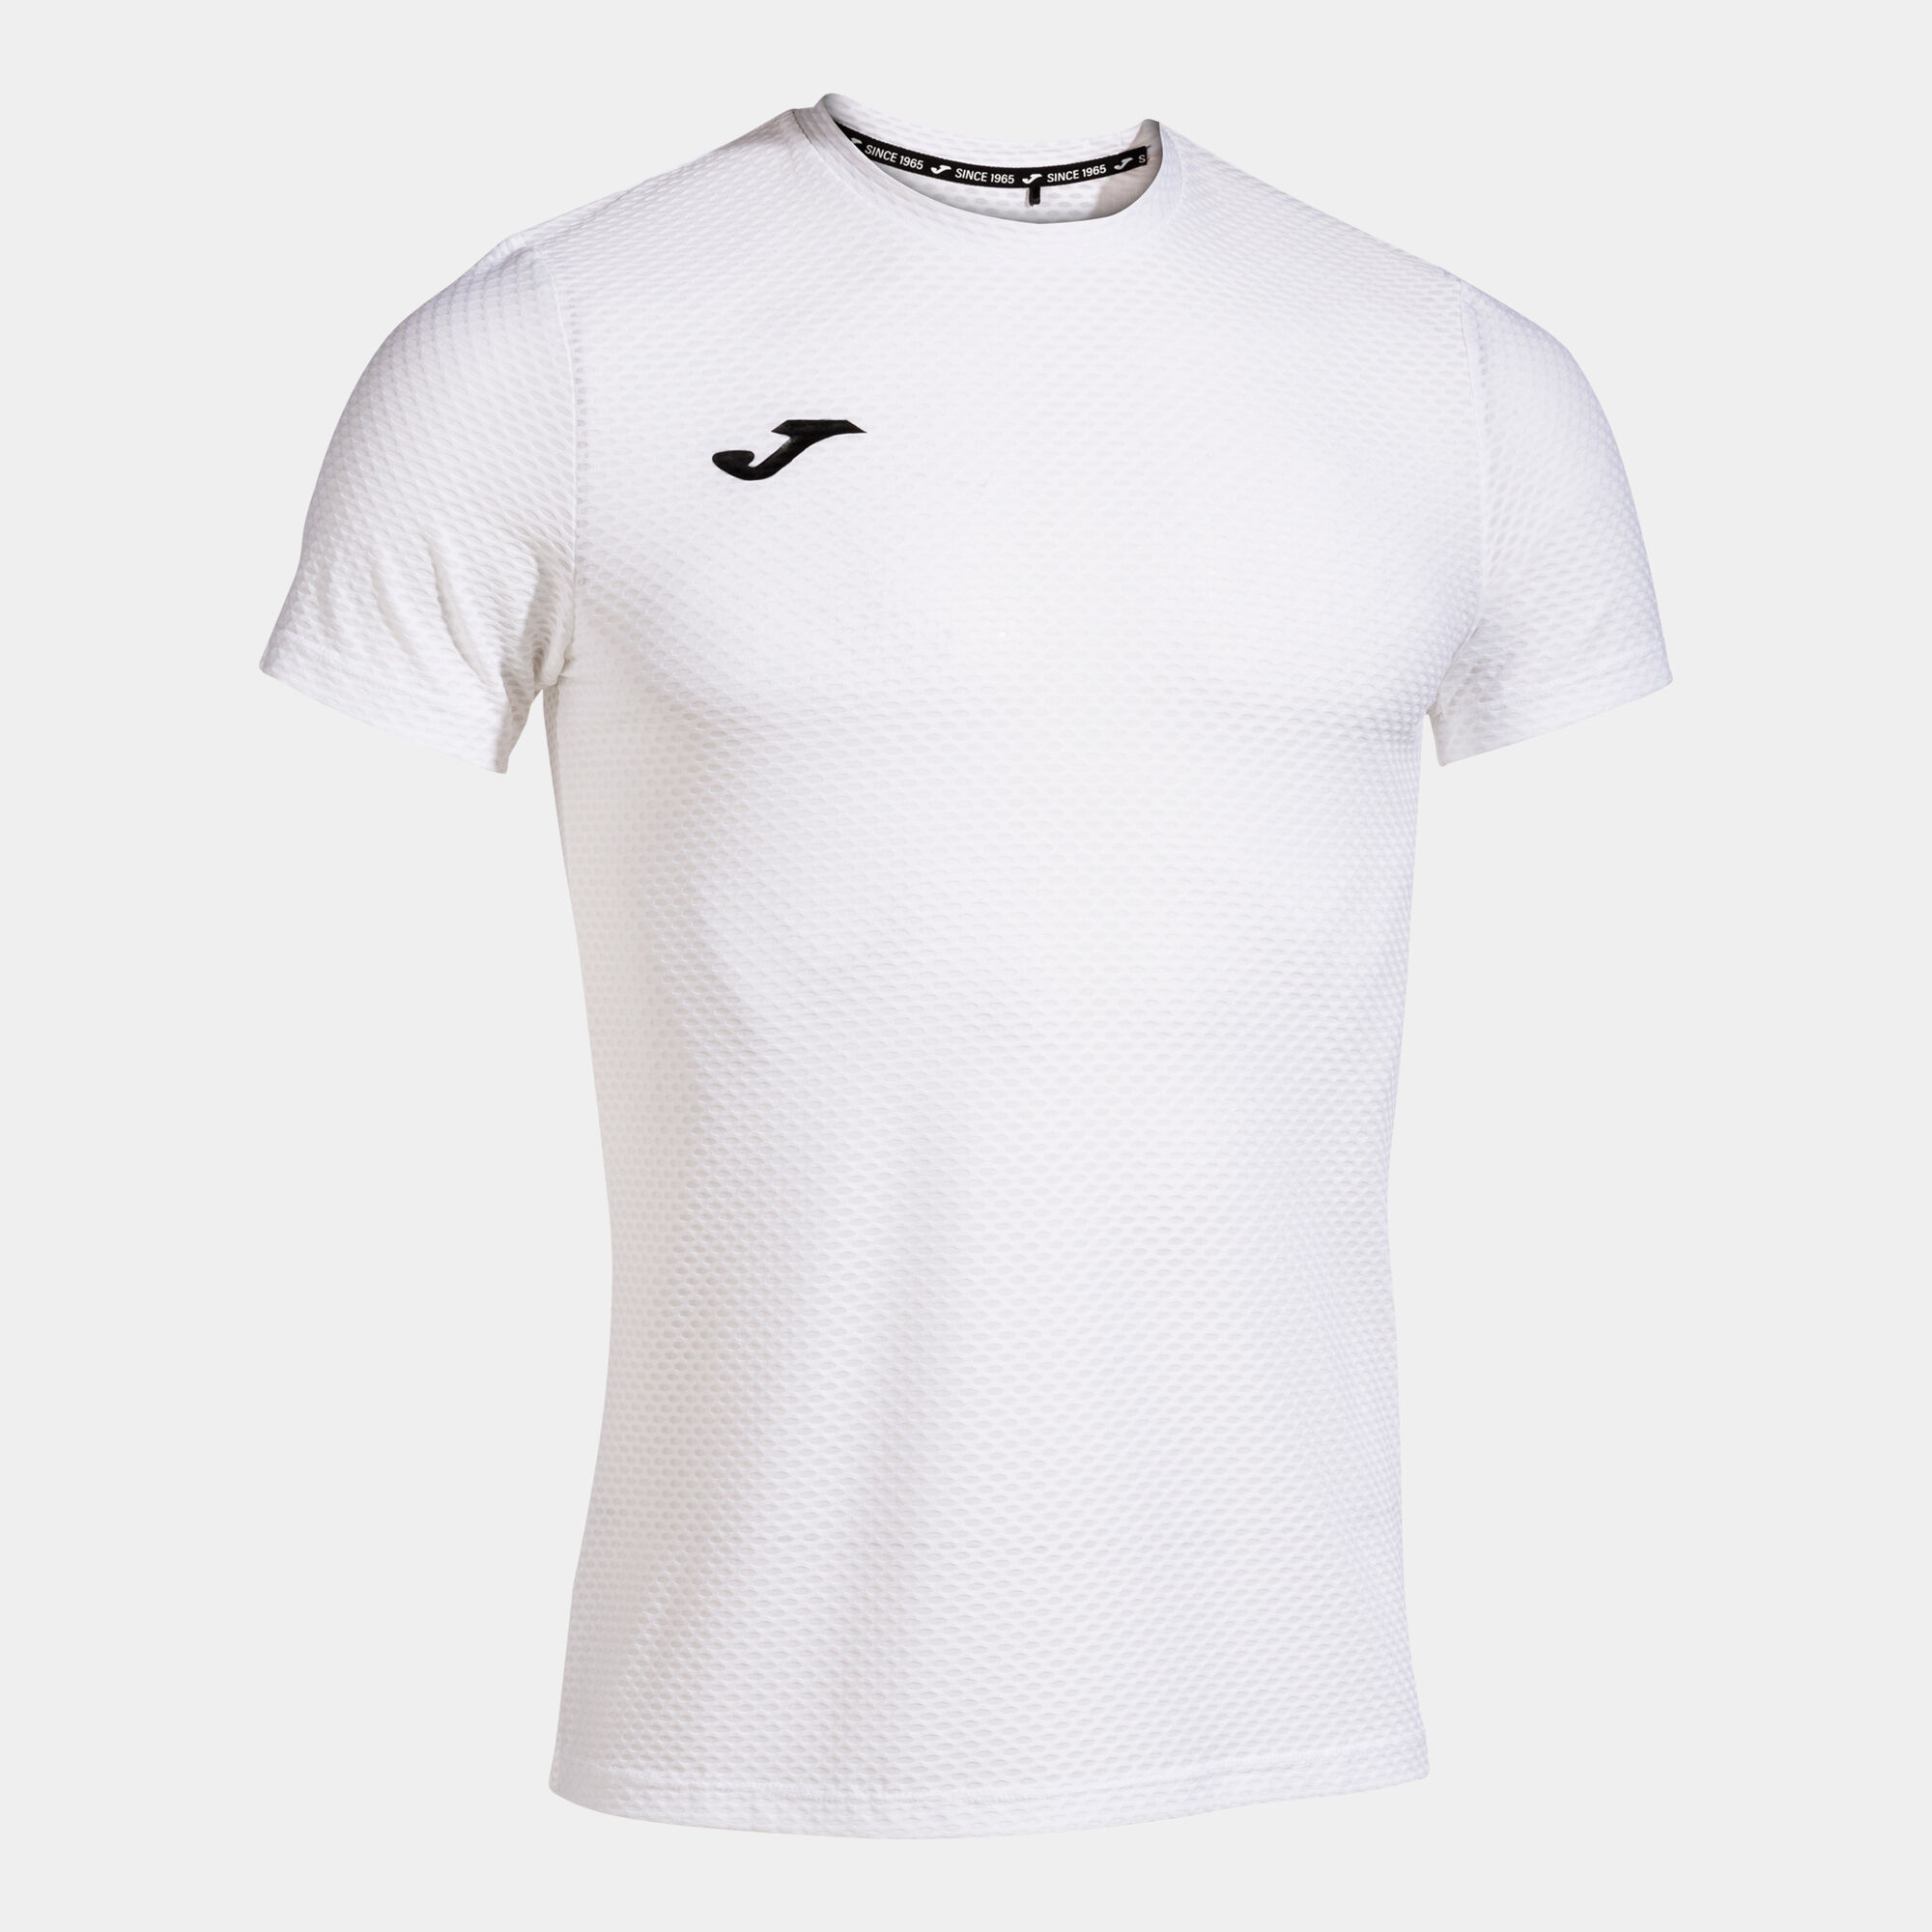 Maillot manches courtes homme R-City blanc